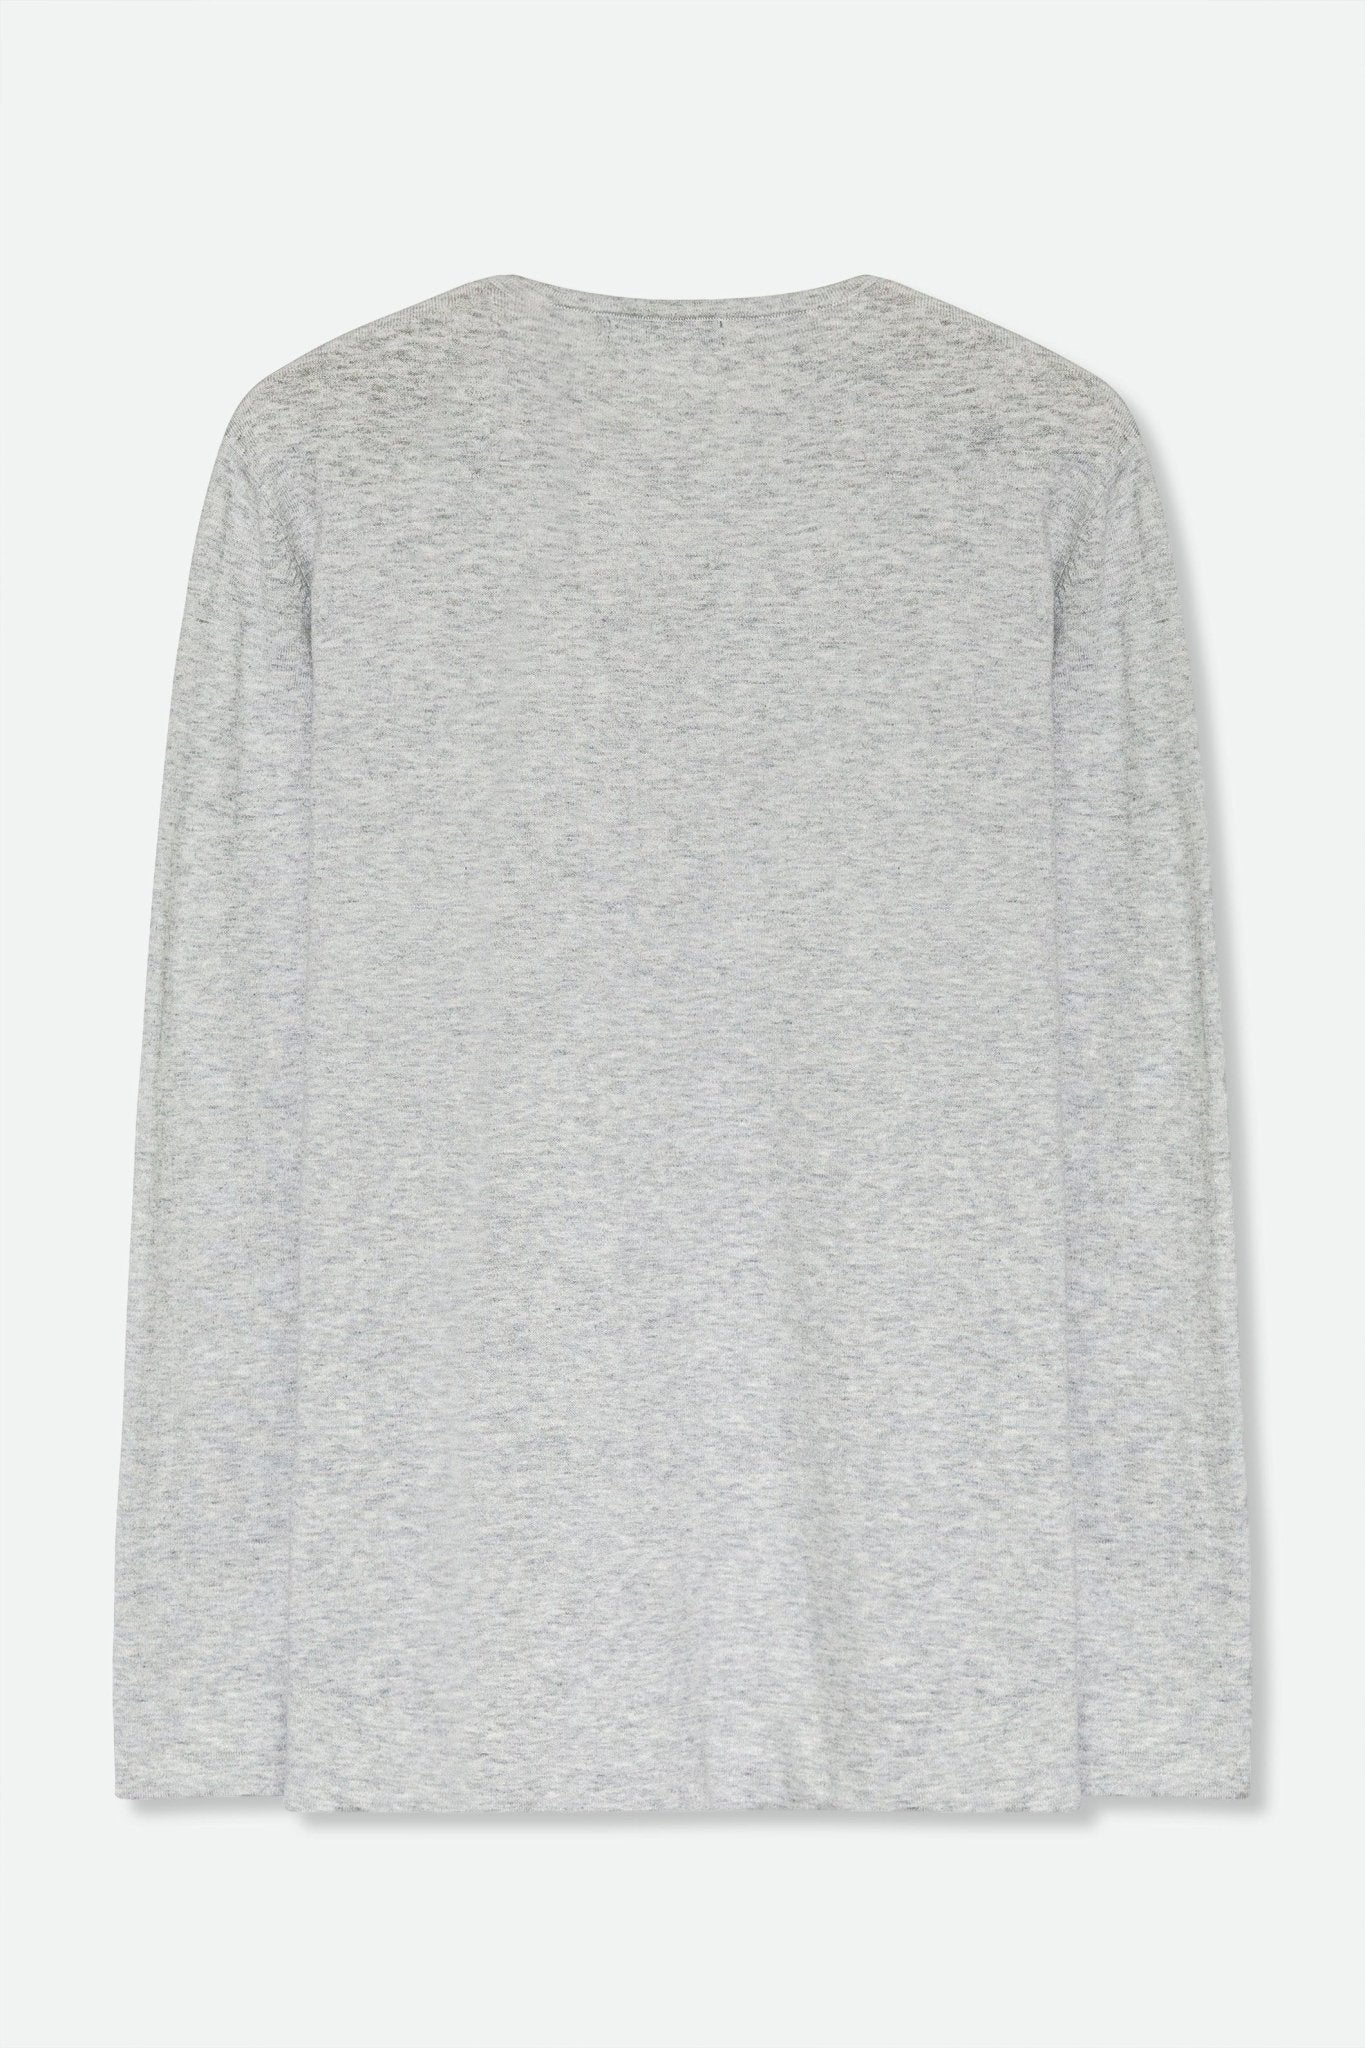 STEVIE LONG SLEEVE CREW IN DOUBLE KNIT PIMA COTTON ICE GREY HEATHER - Jarbo